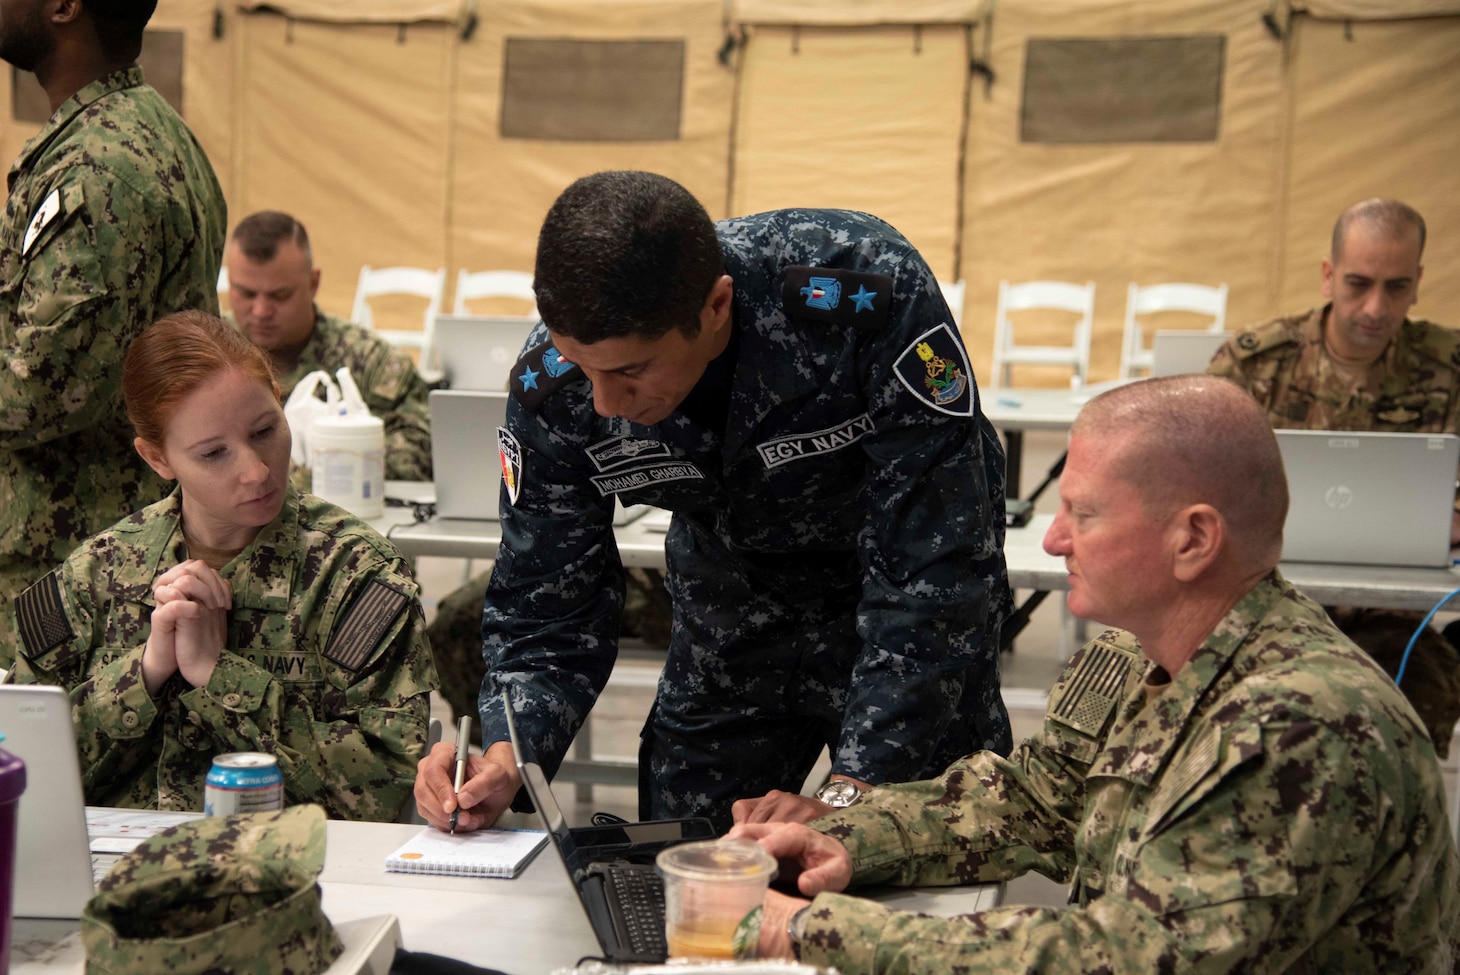 Ensign Kelsey Spangle and Intelligence Specialist Chief Michael Jacobs, both of U.S. Navy Central Command’s Navy Reserve intelligence unit, consult with an Egyptian naval officer during International Maritime Exercise/Cutlass Express 2023, March 12, 2023, in Manama, Bahrain. IMX/CE 2023 is the largest multinational training event in the Middle East, involving 7,000 personnel from more than 50 nations and international organizations committed to preserving the rules-based international order and strengthening regional maritime security cooperation. (U.S. Navy photo by Mass Communication Specialist 1st Class Helen Brown)